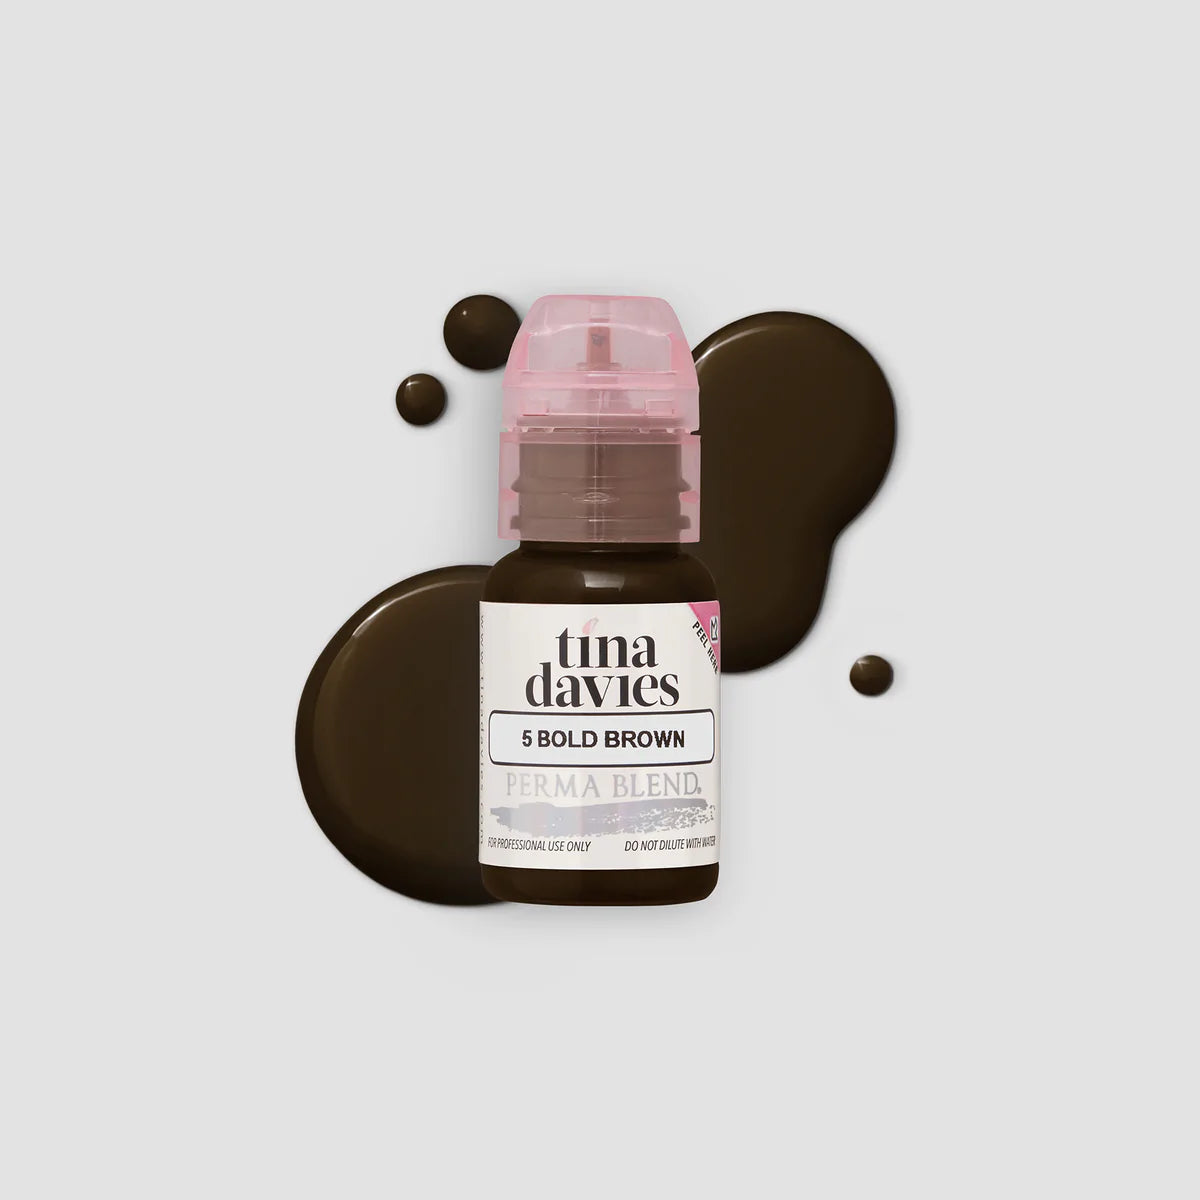 Tina davies bold brown pigment in a bottle with a transparent pink lid